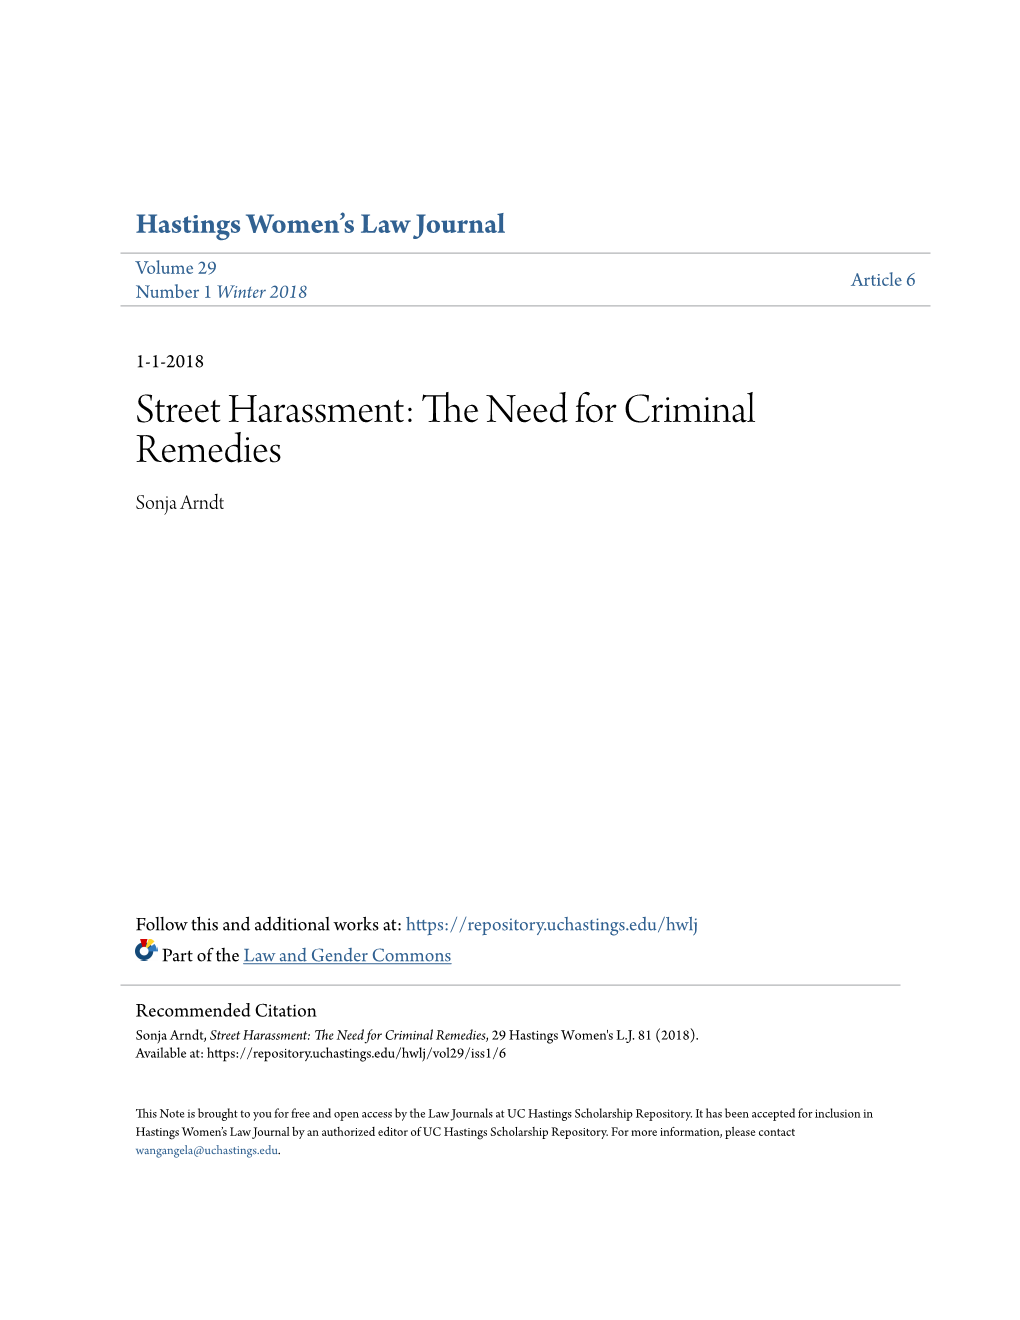 Street Harassment: the Need for Criminal Remedies, 29 Hastings Women's L.J